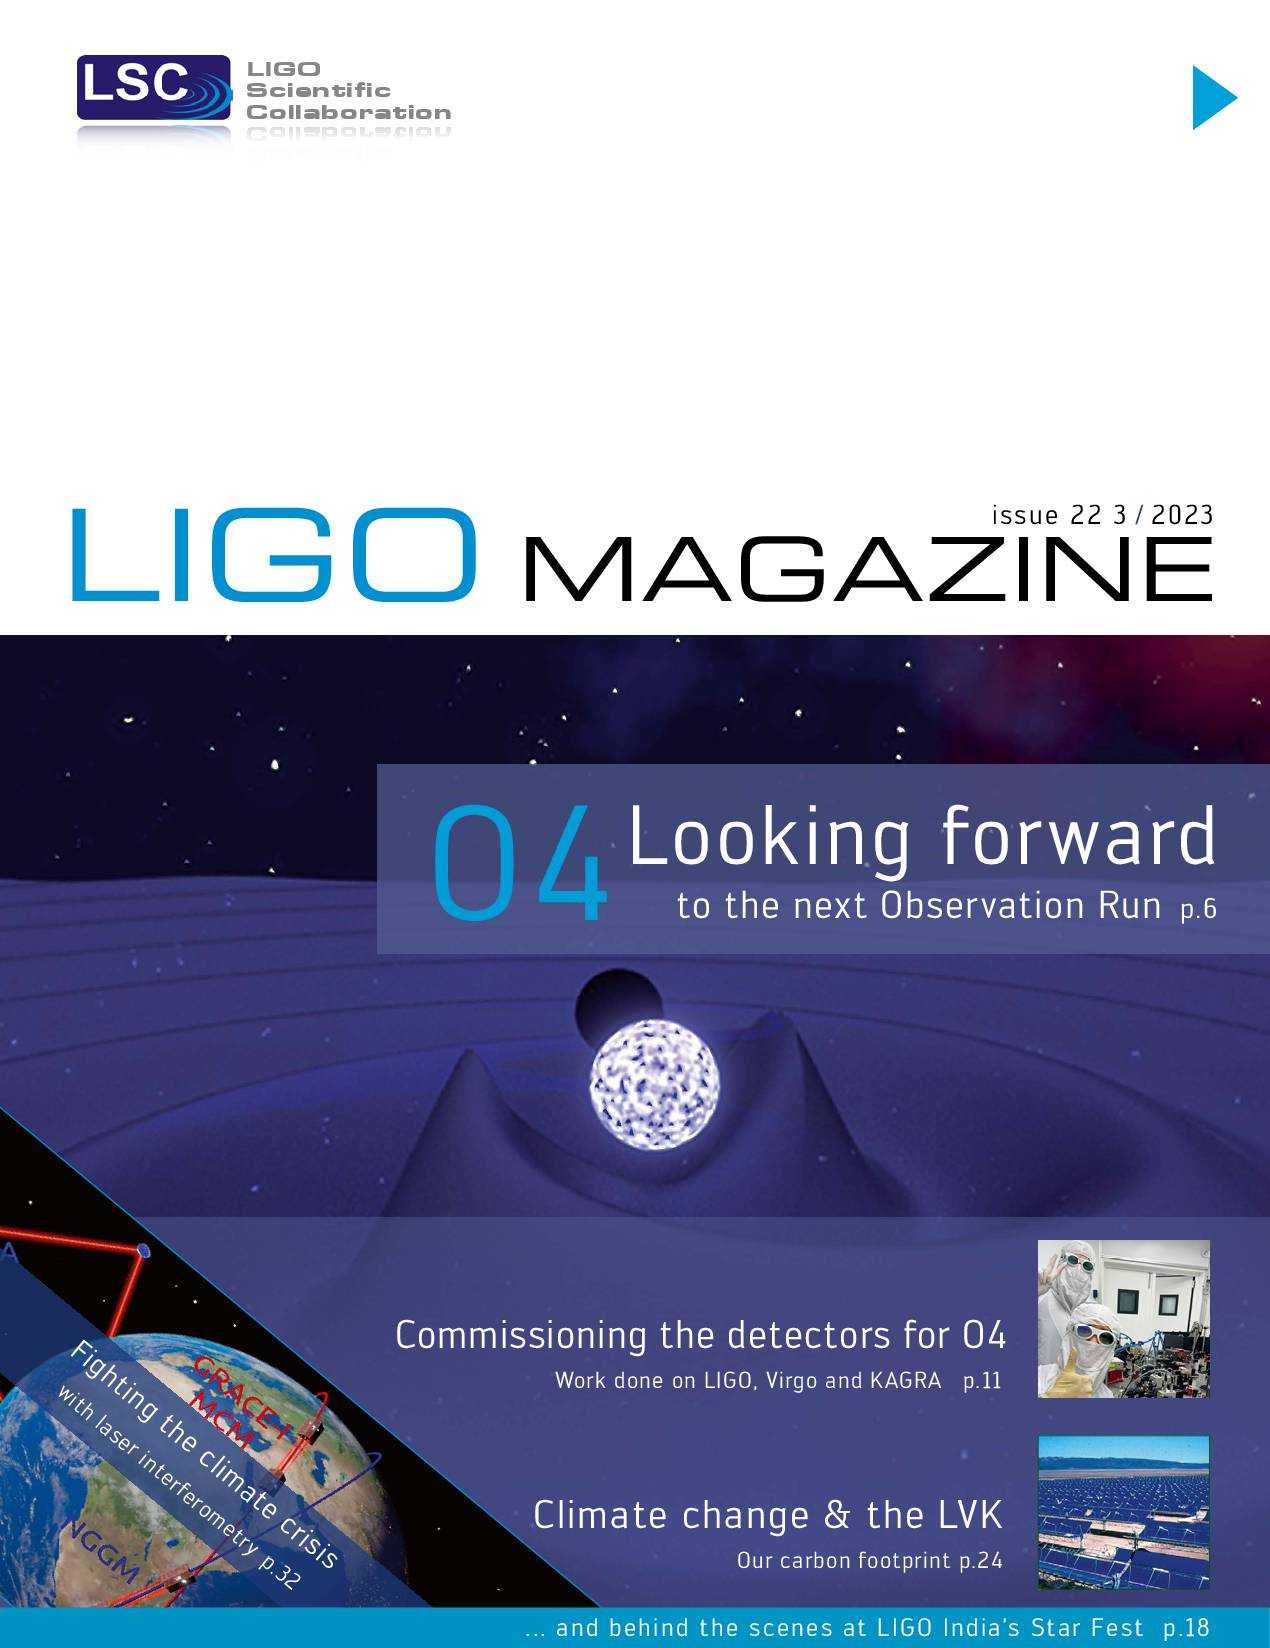 News-Image 23 of: New LIGO Magazine Issue 22 is out